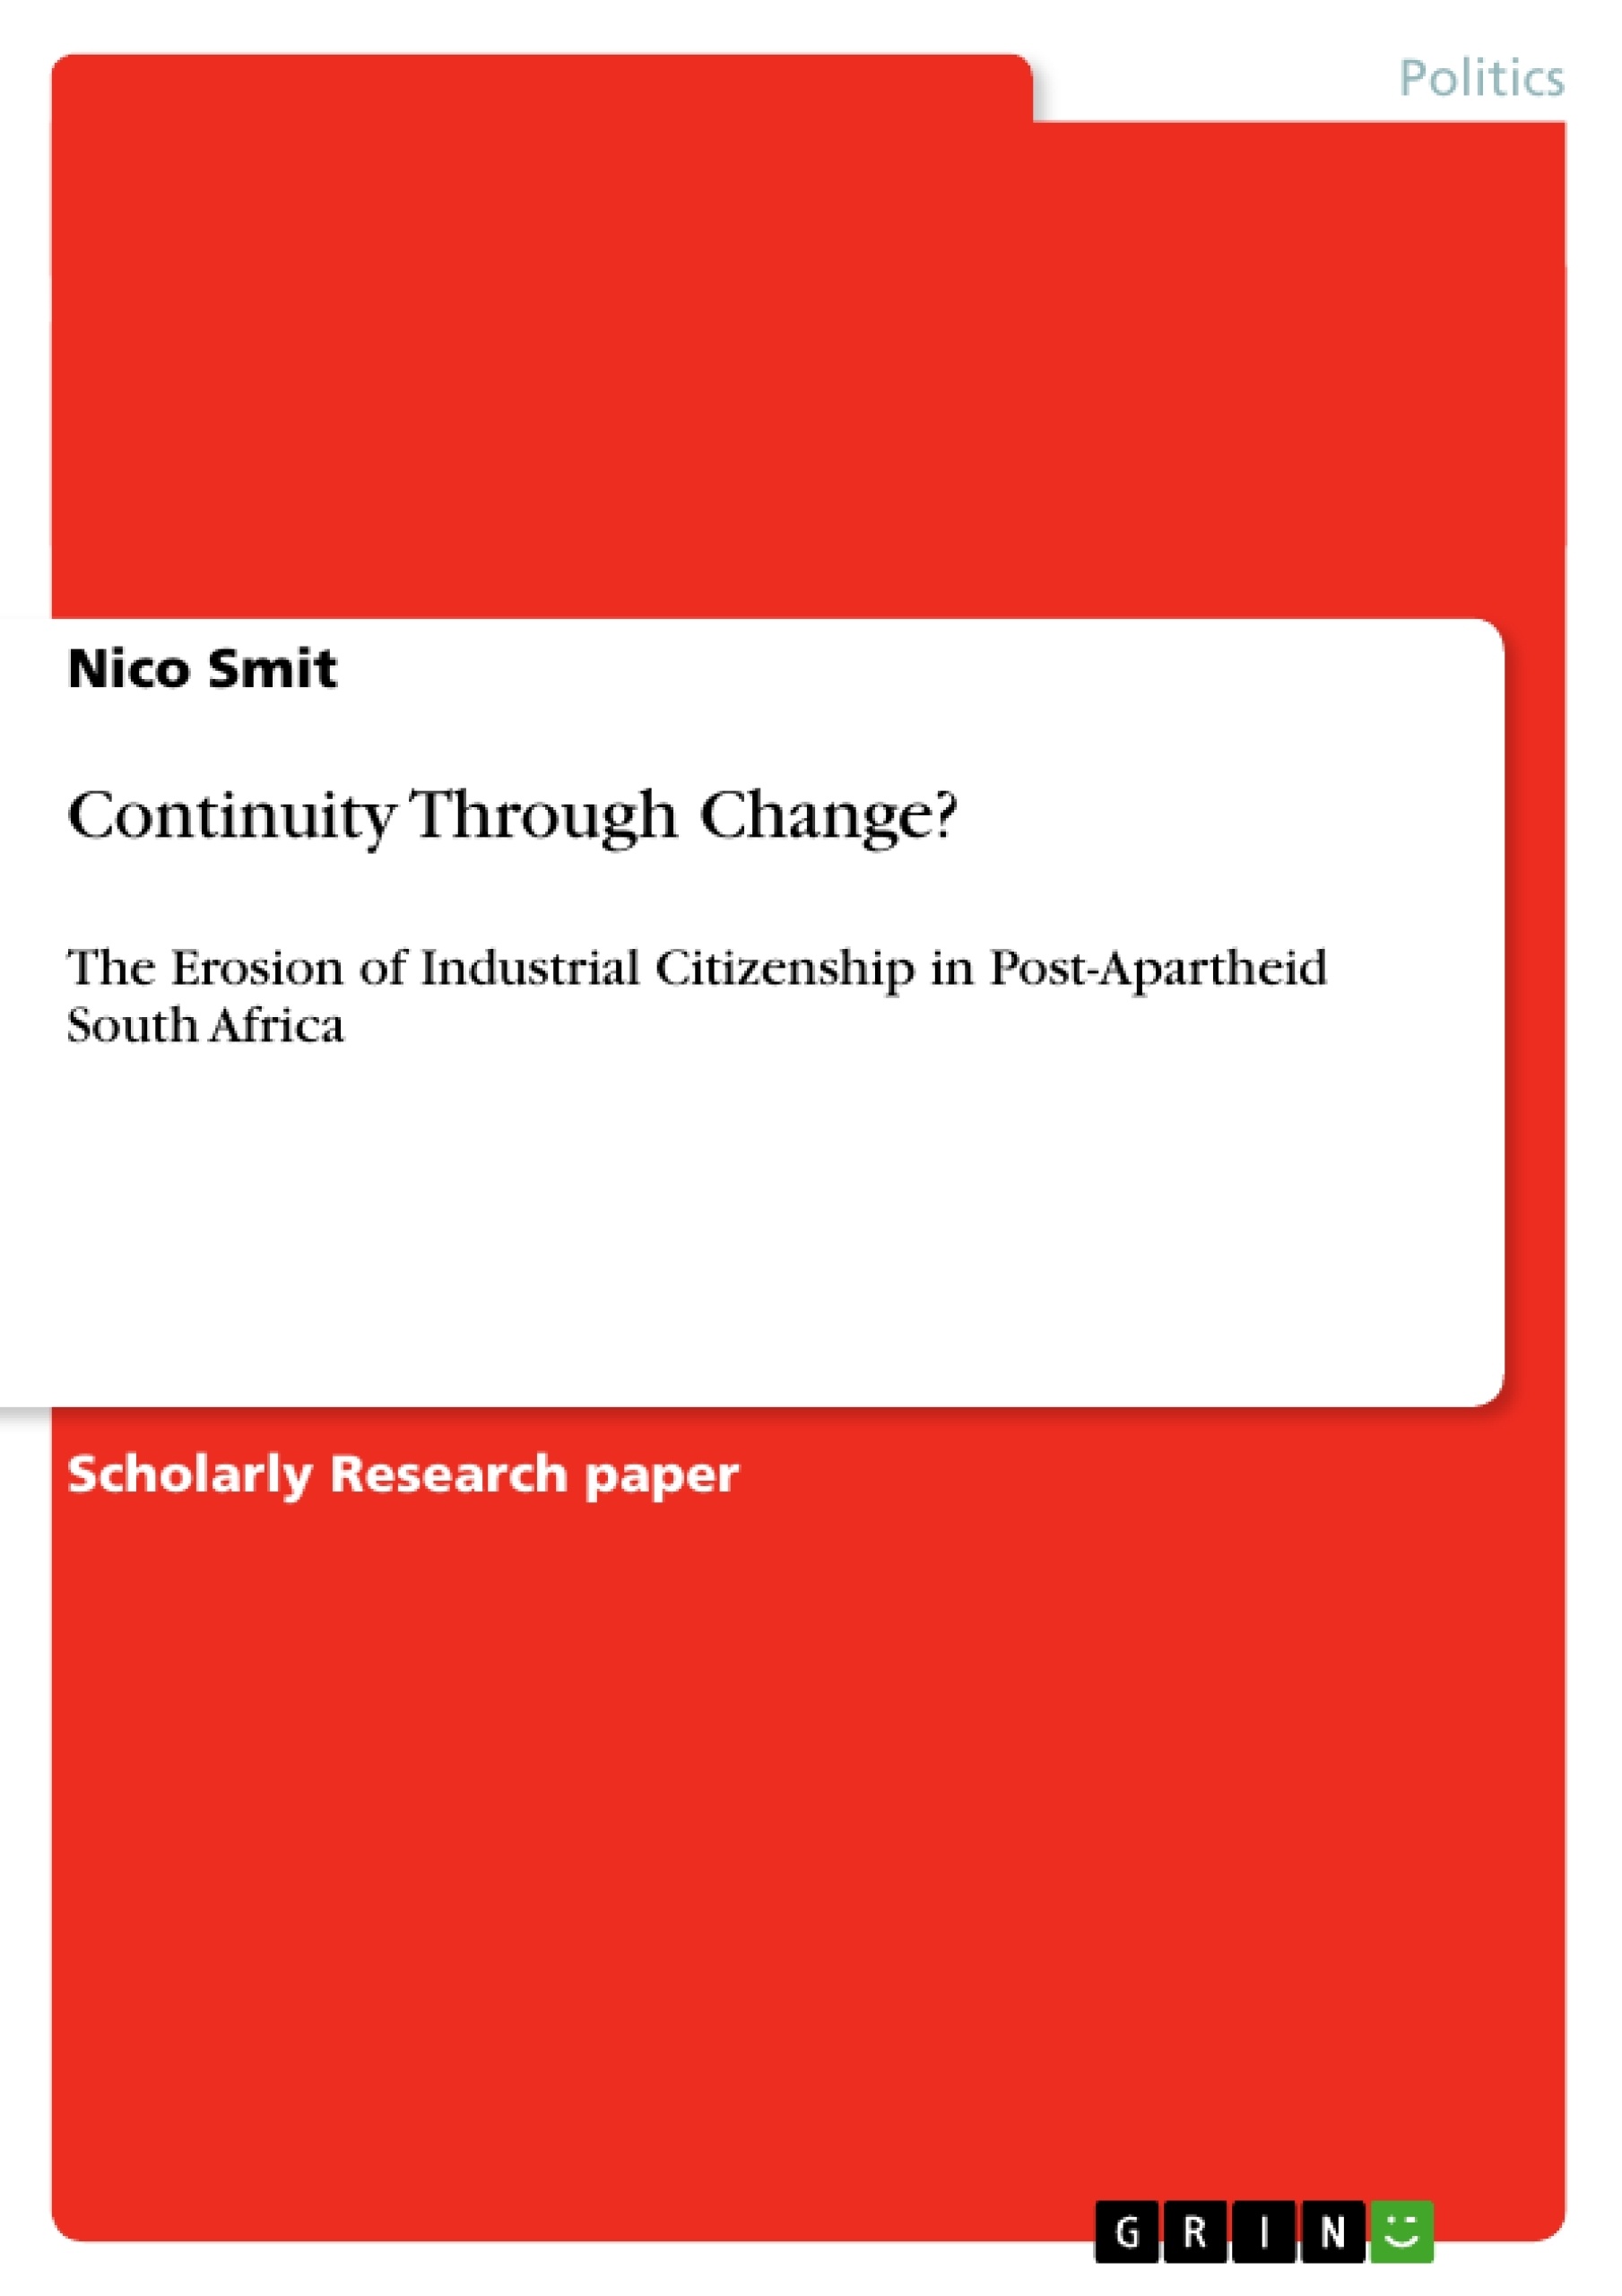 Título: Continuity Through Change?